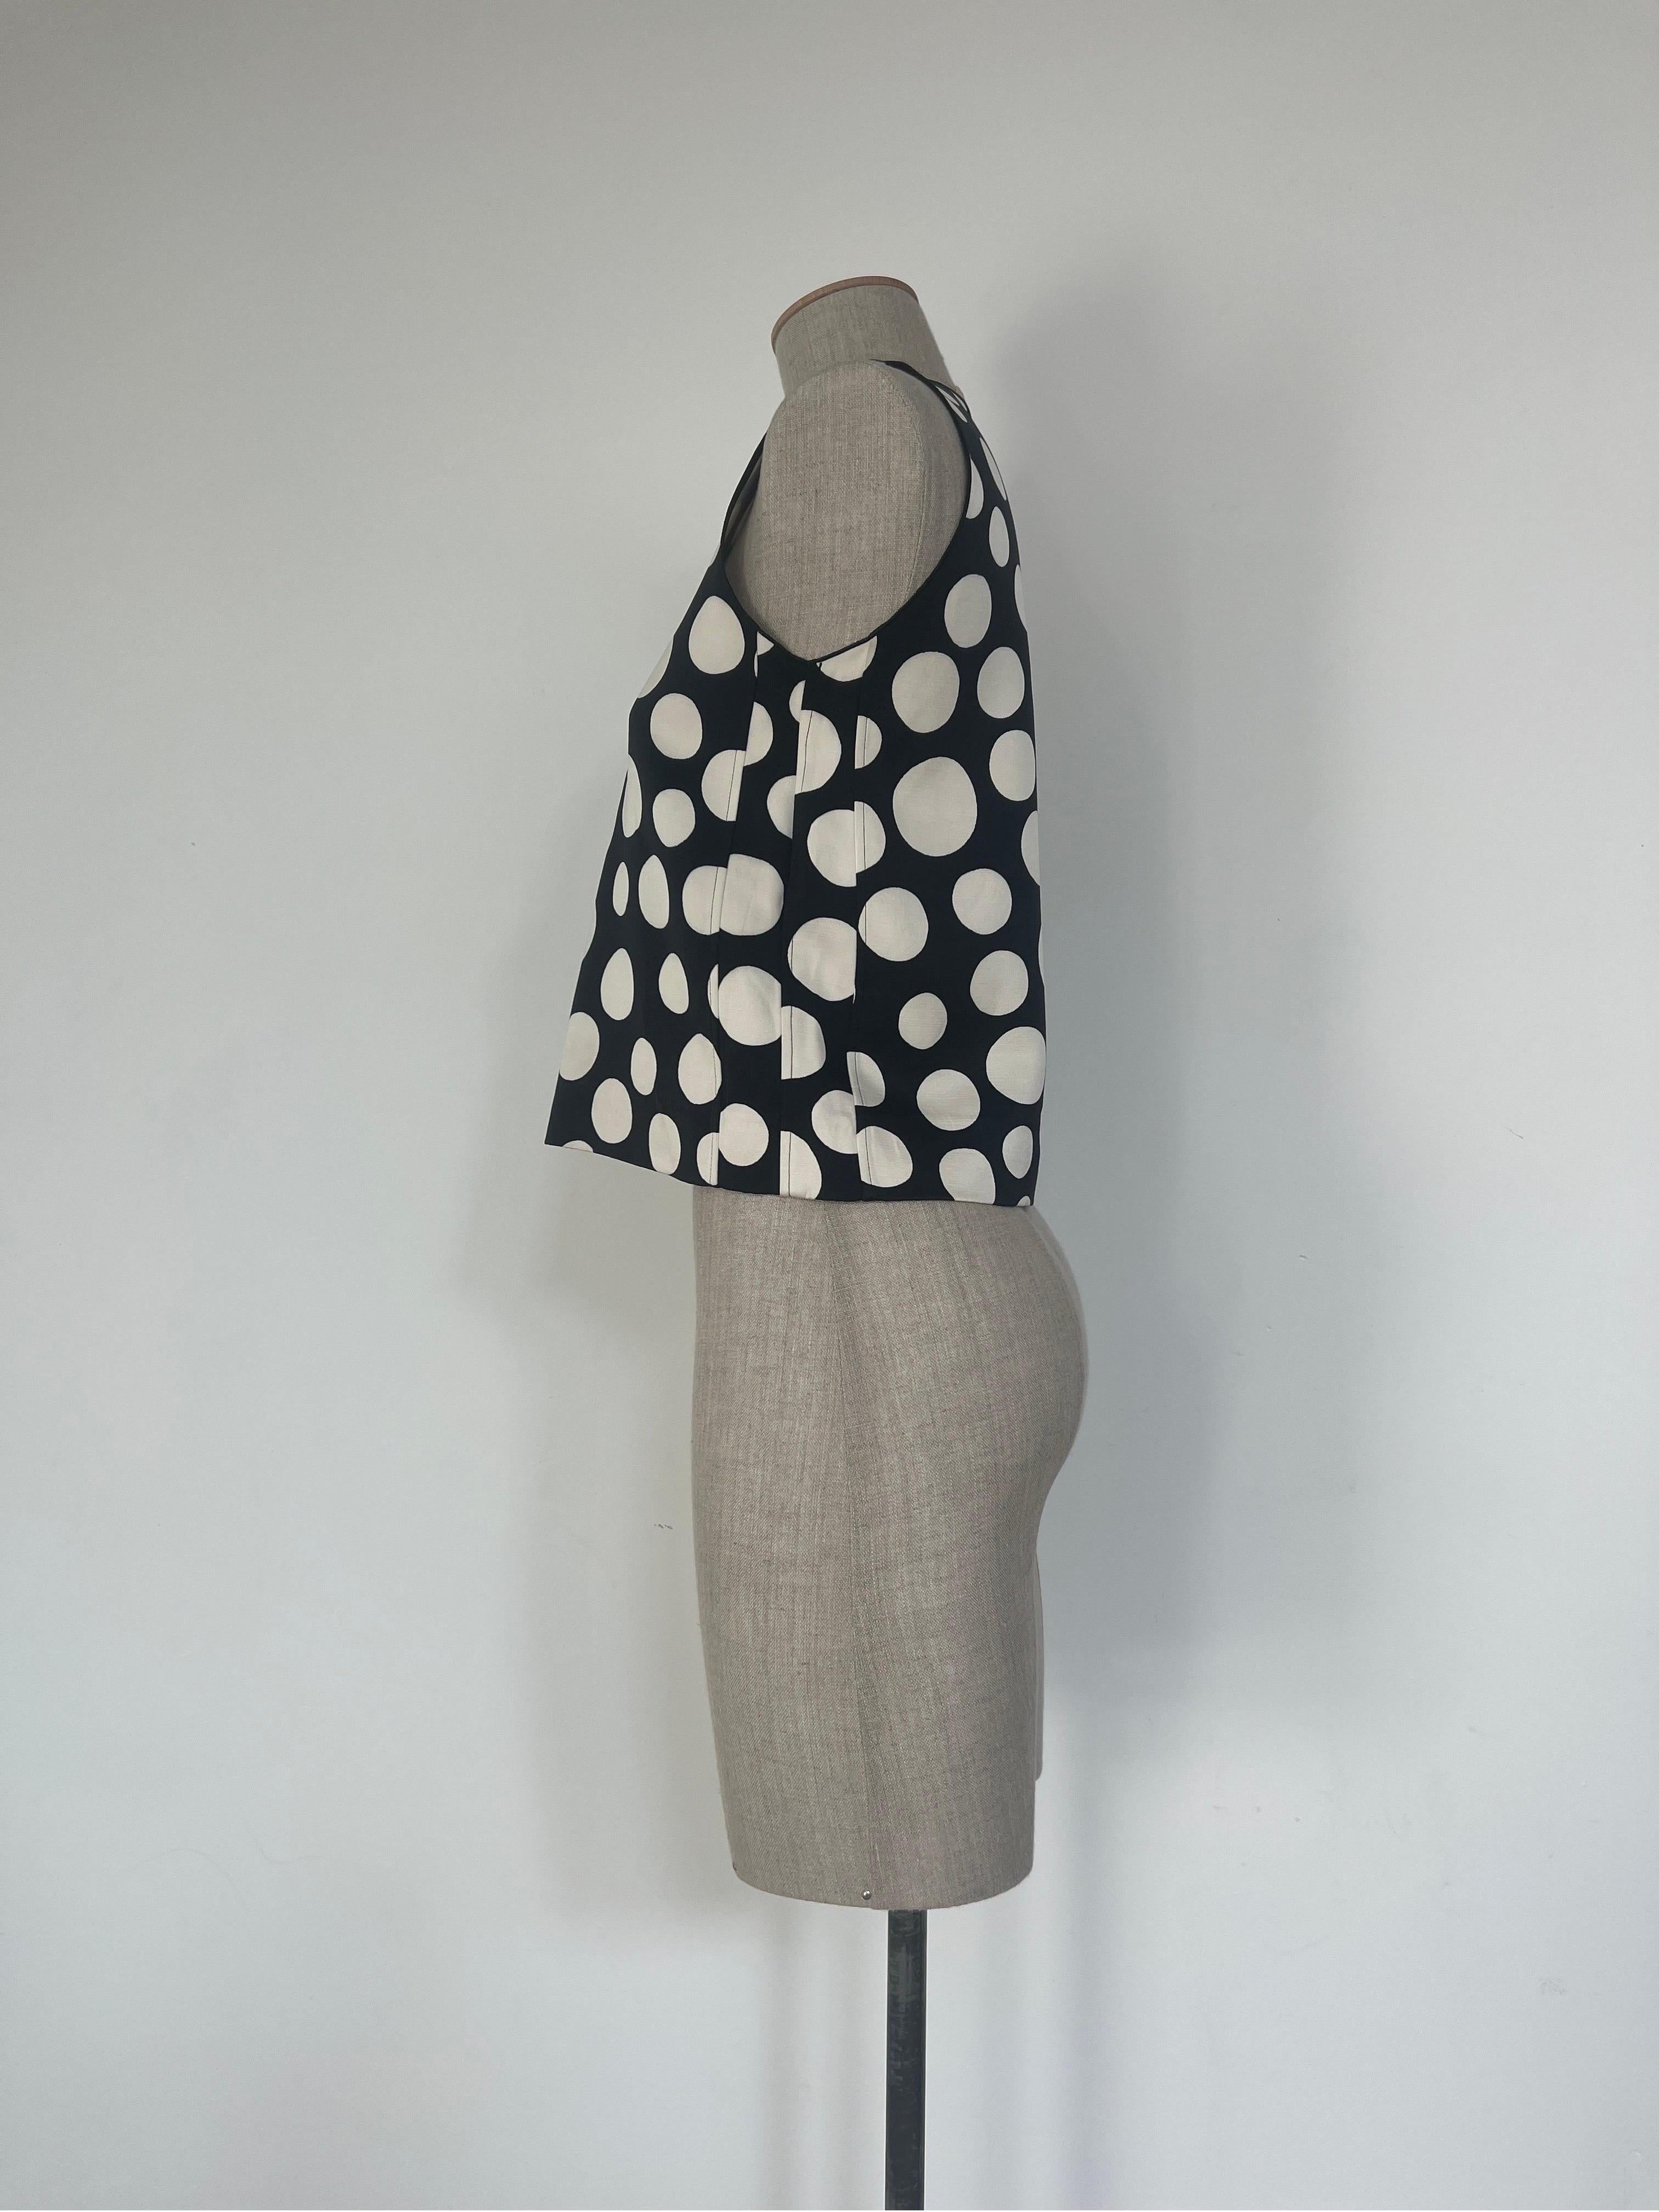 OLD CÉLINE Phoebe Philo Polka Dot Top In Excellent Condition For Sale In London, GB